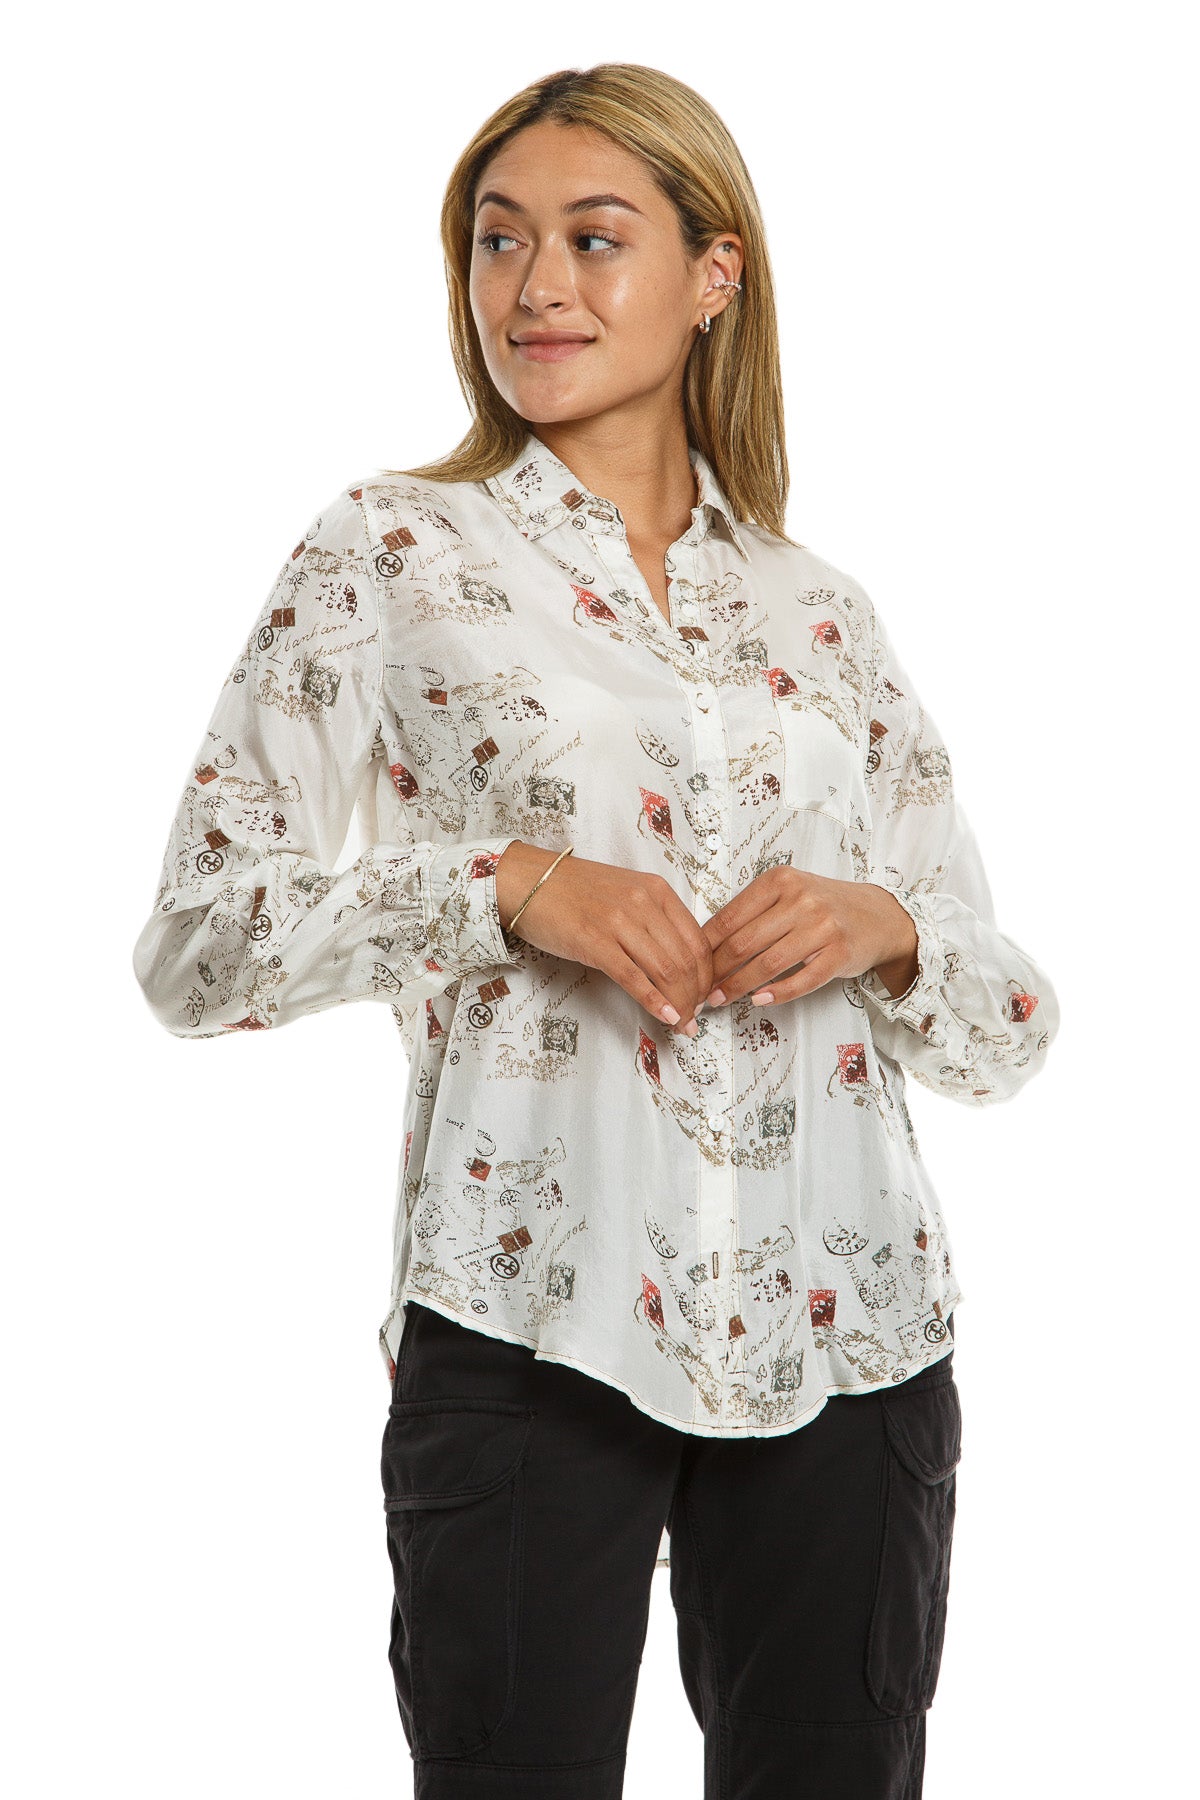 100% Silk long sleeve blouses in Natural